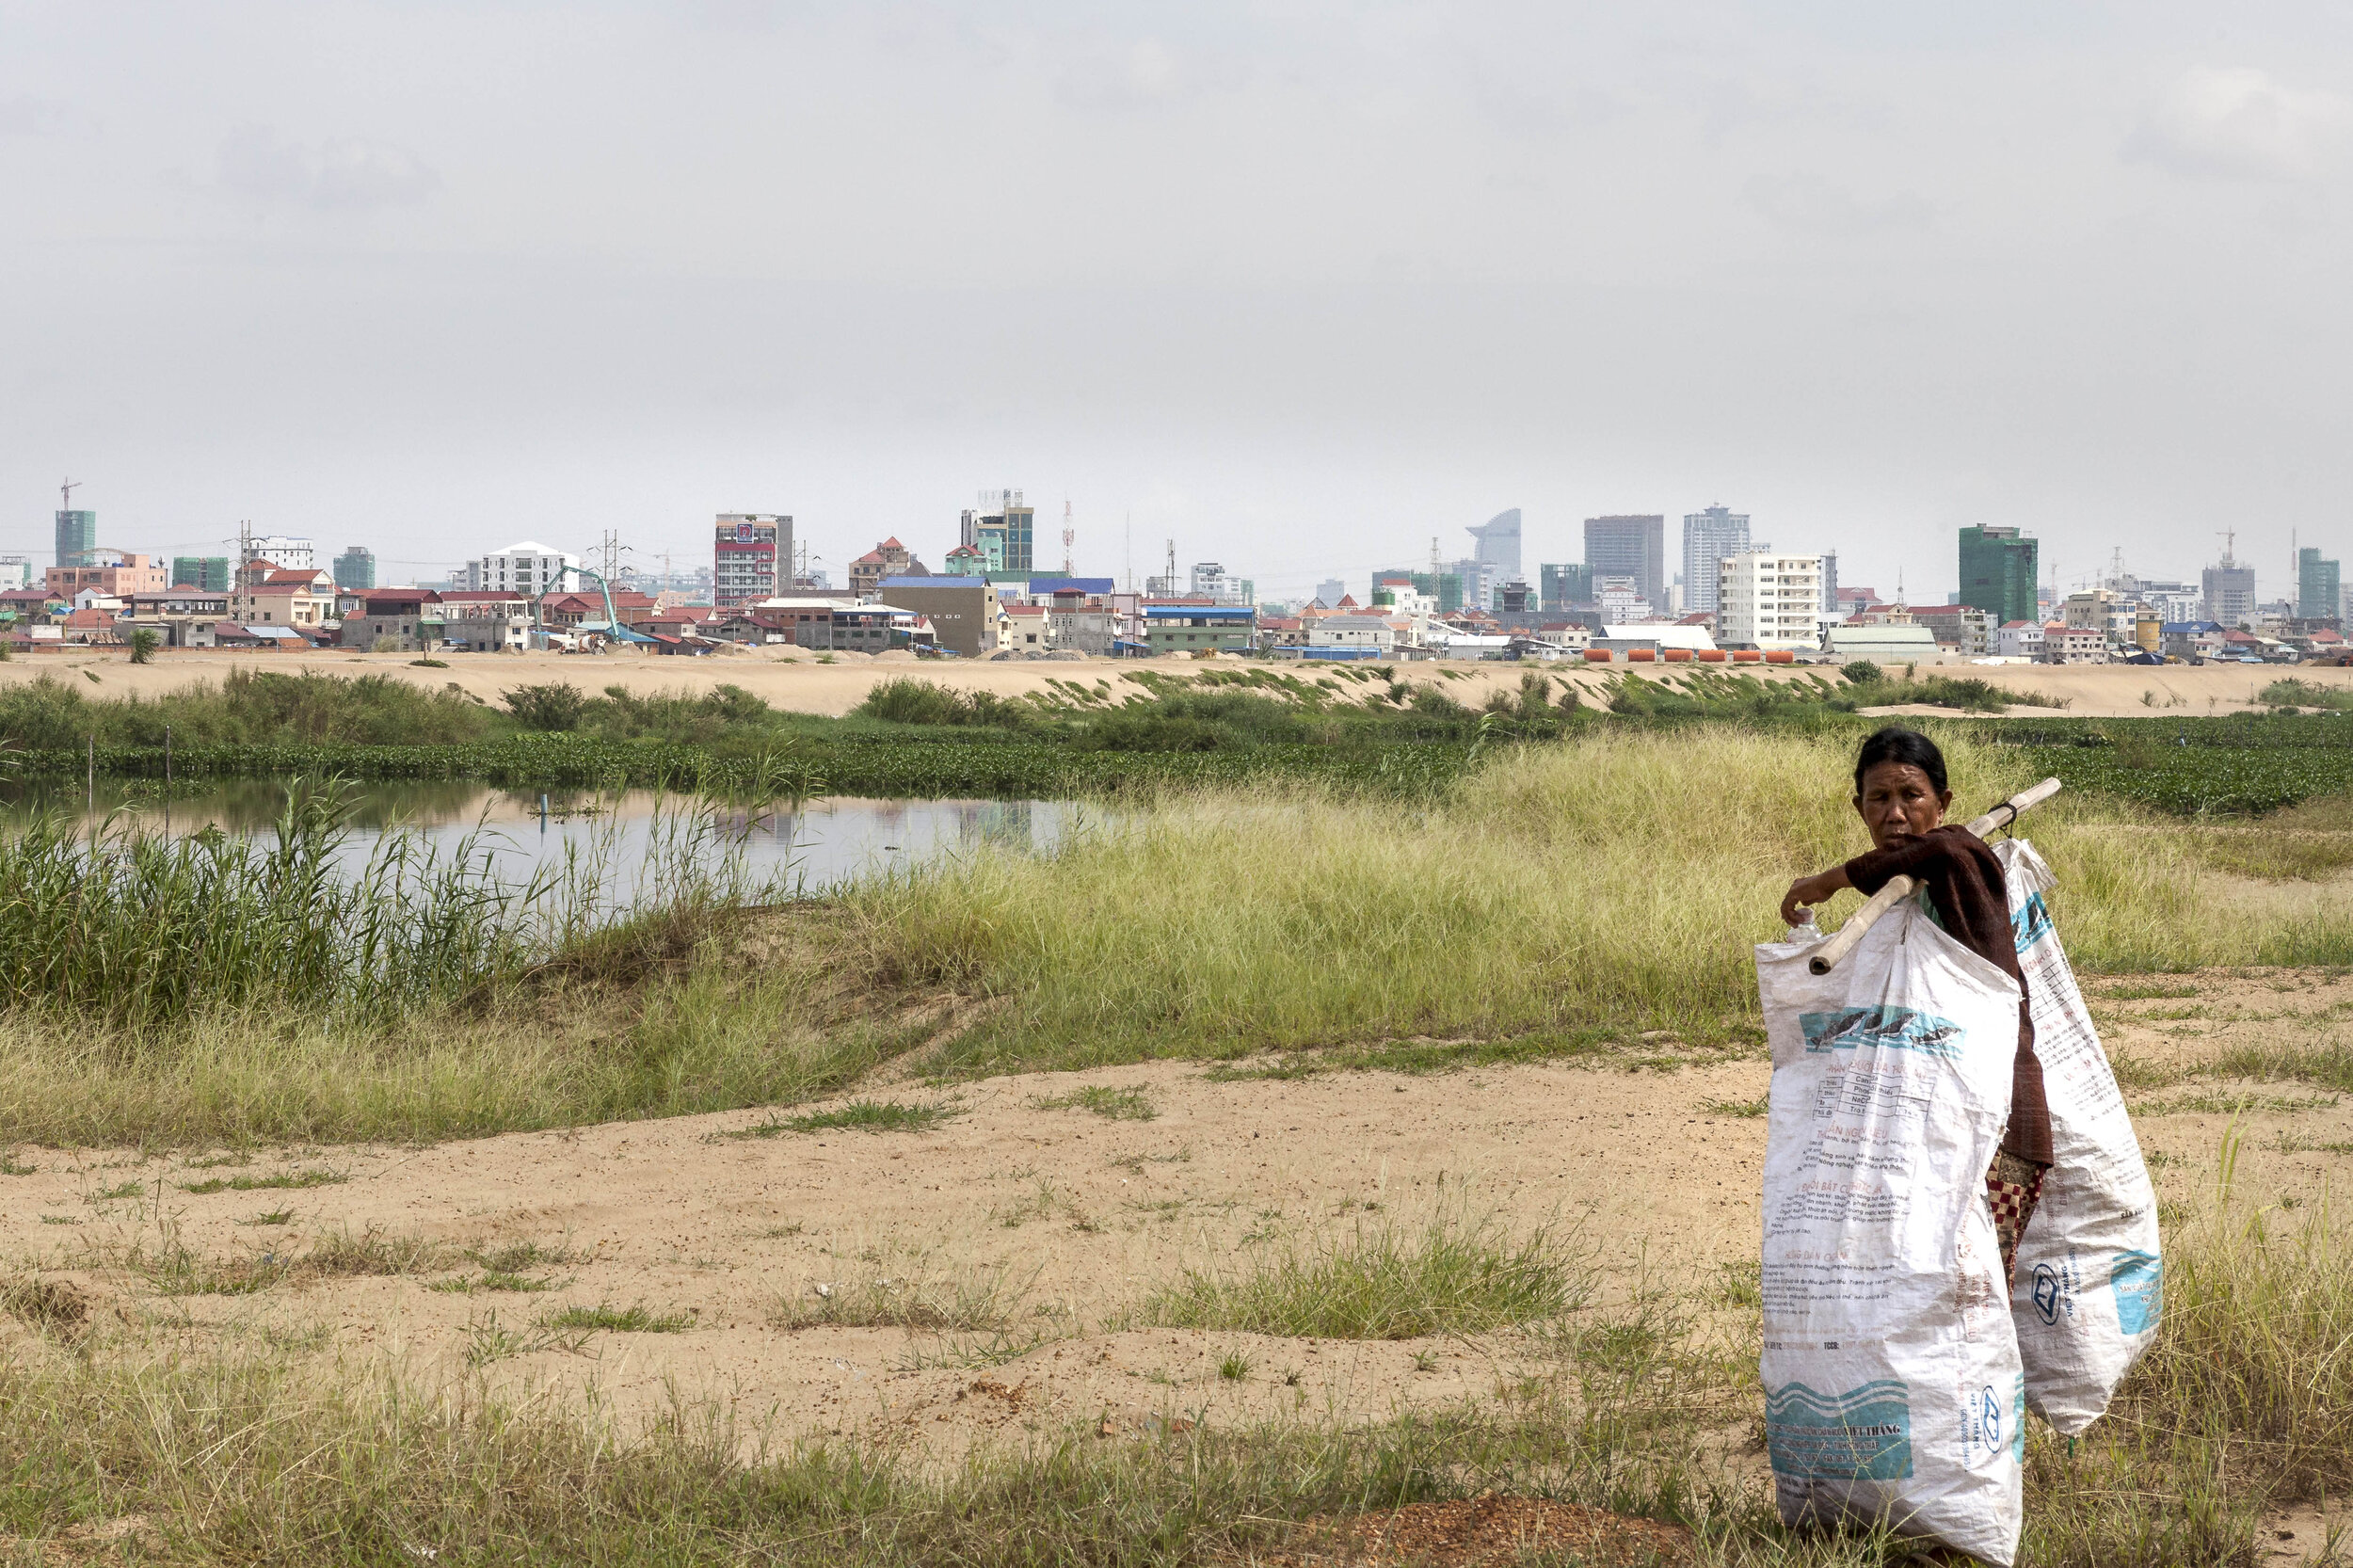  A woman collects plastic rubbish, with the Phnom Penh skyline and a filled portion of the lake behind her. 